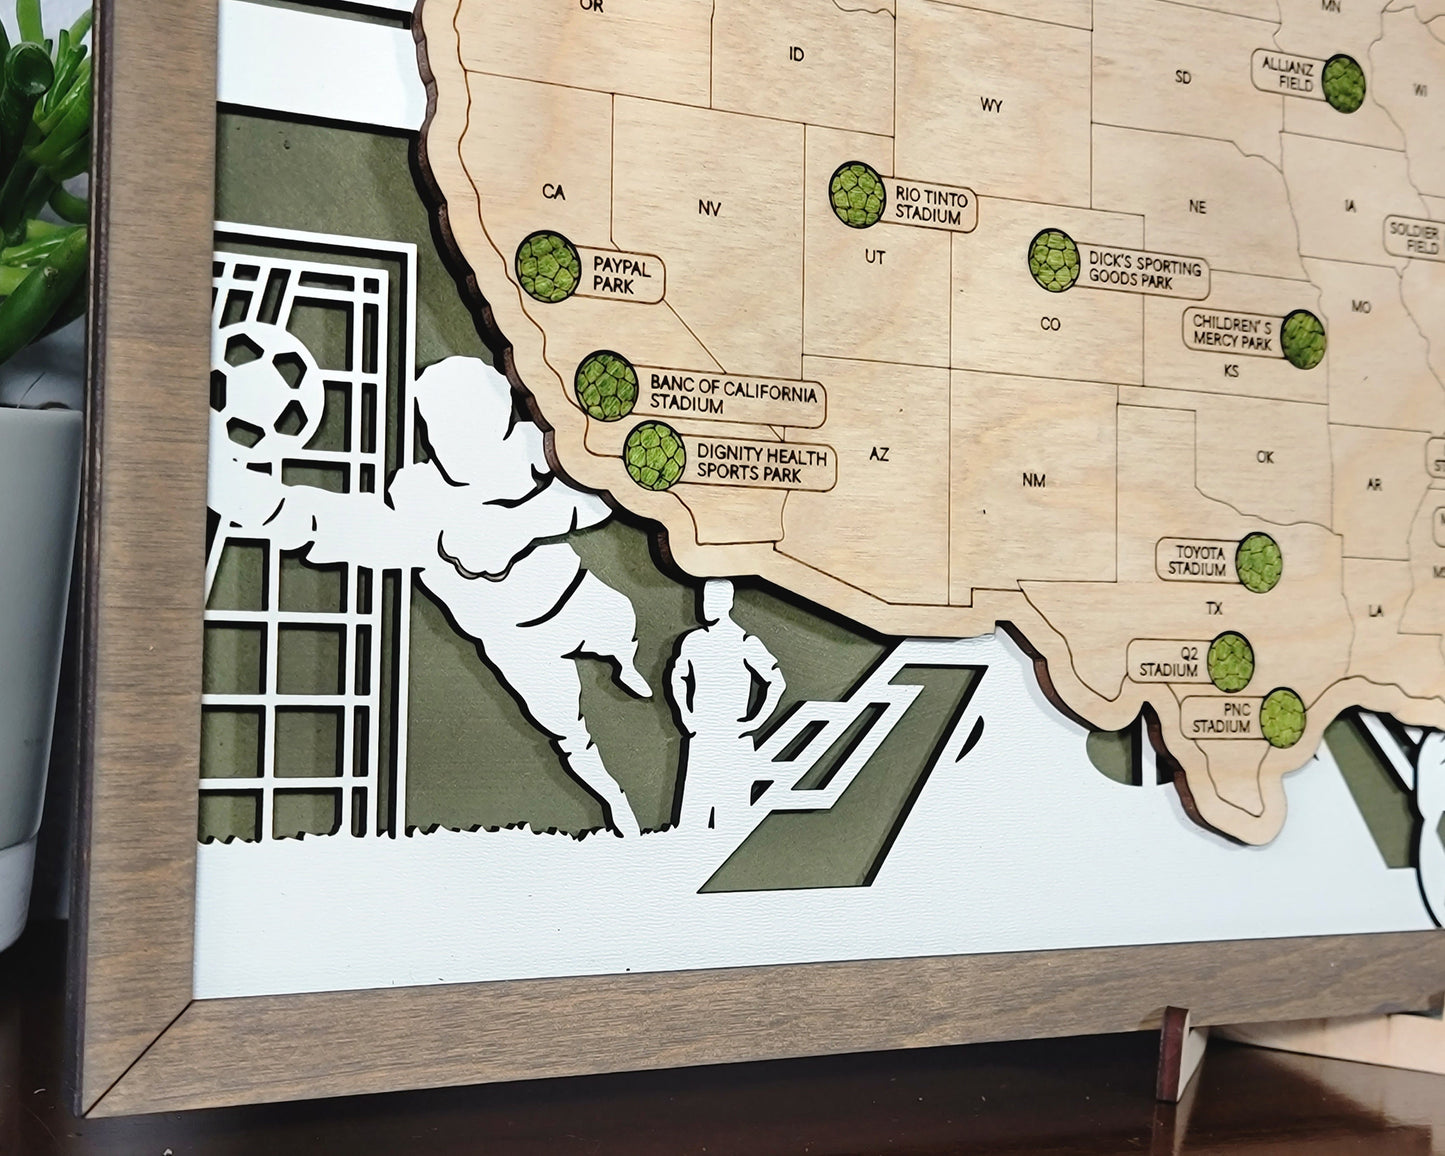 The Stadium Series Soccer Map - Stadium Tracker - SVG File Download - Sized for Glowforge